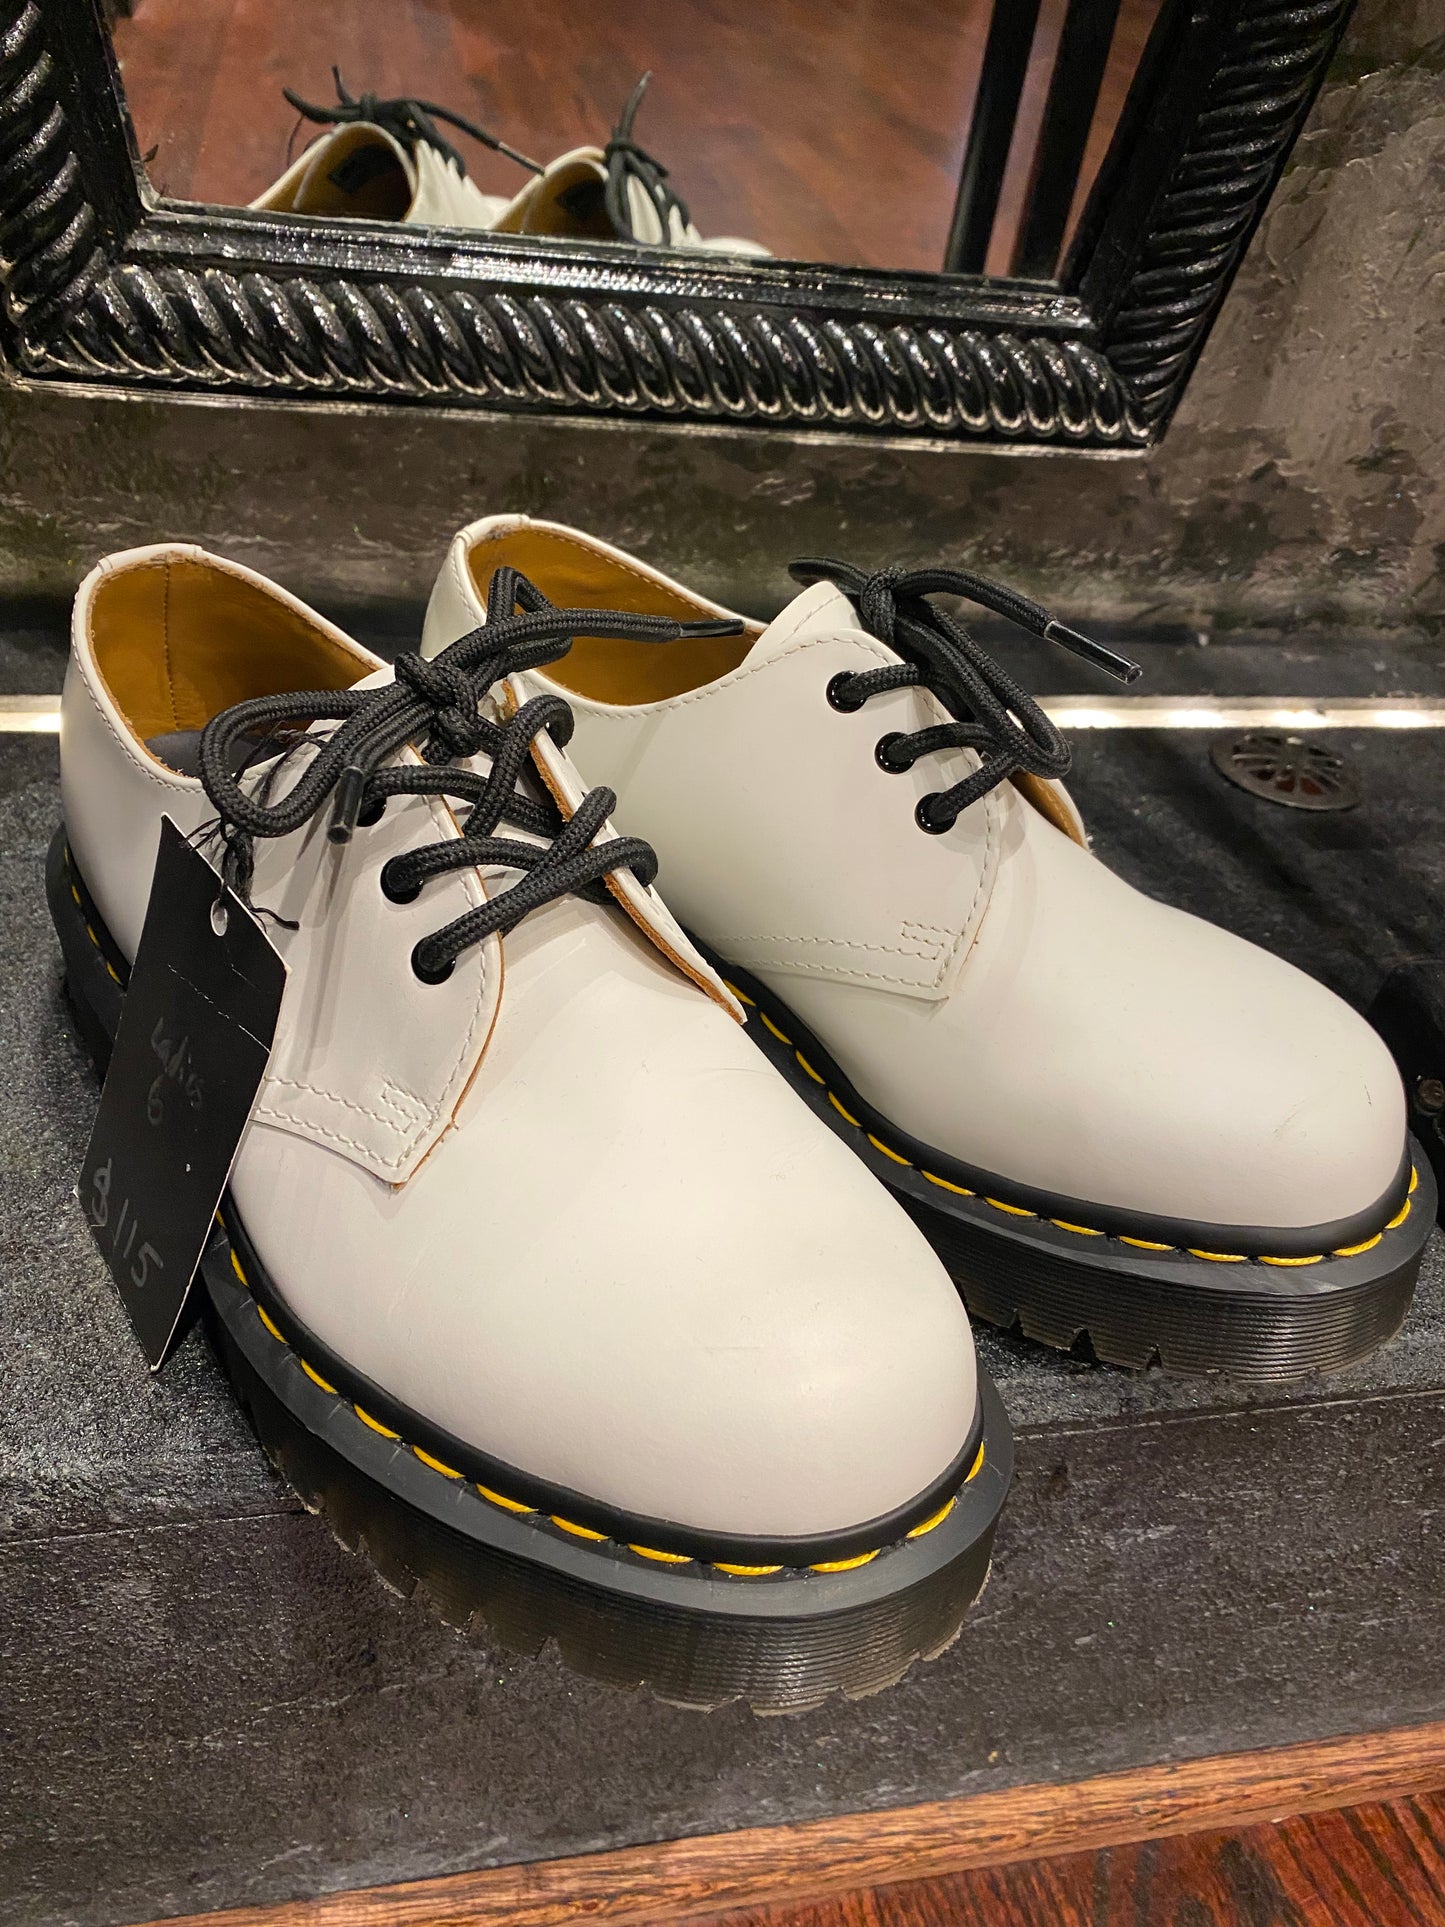 Dr. Martens 1461 Classic Oxford